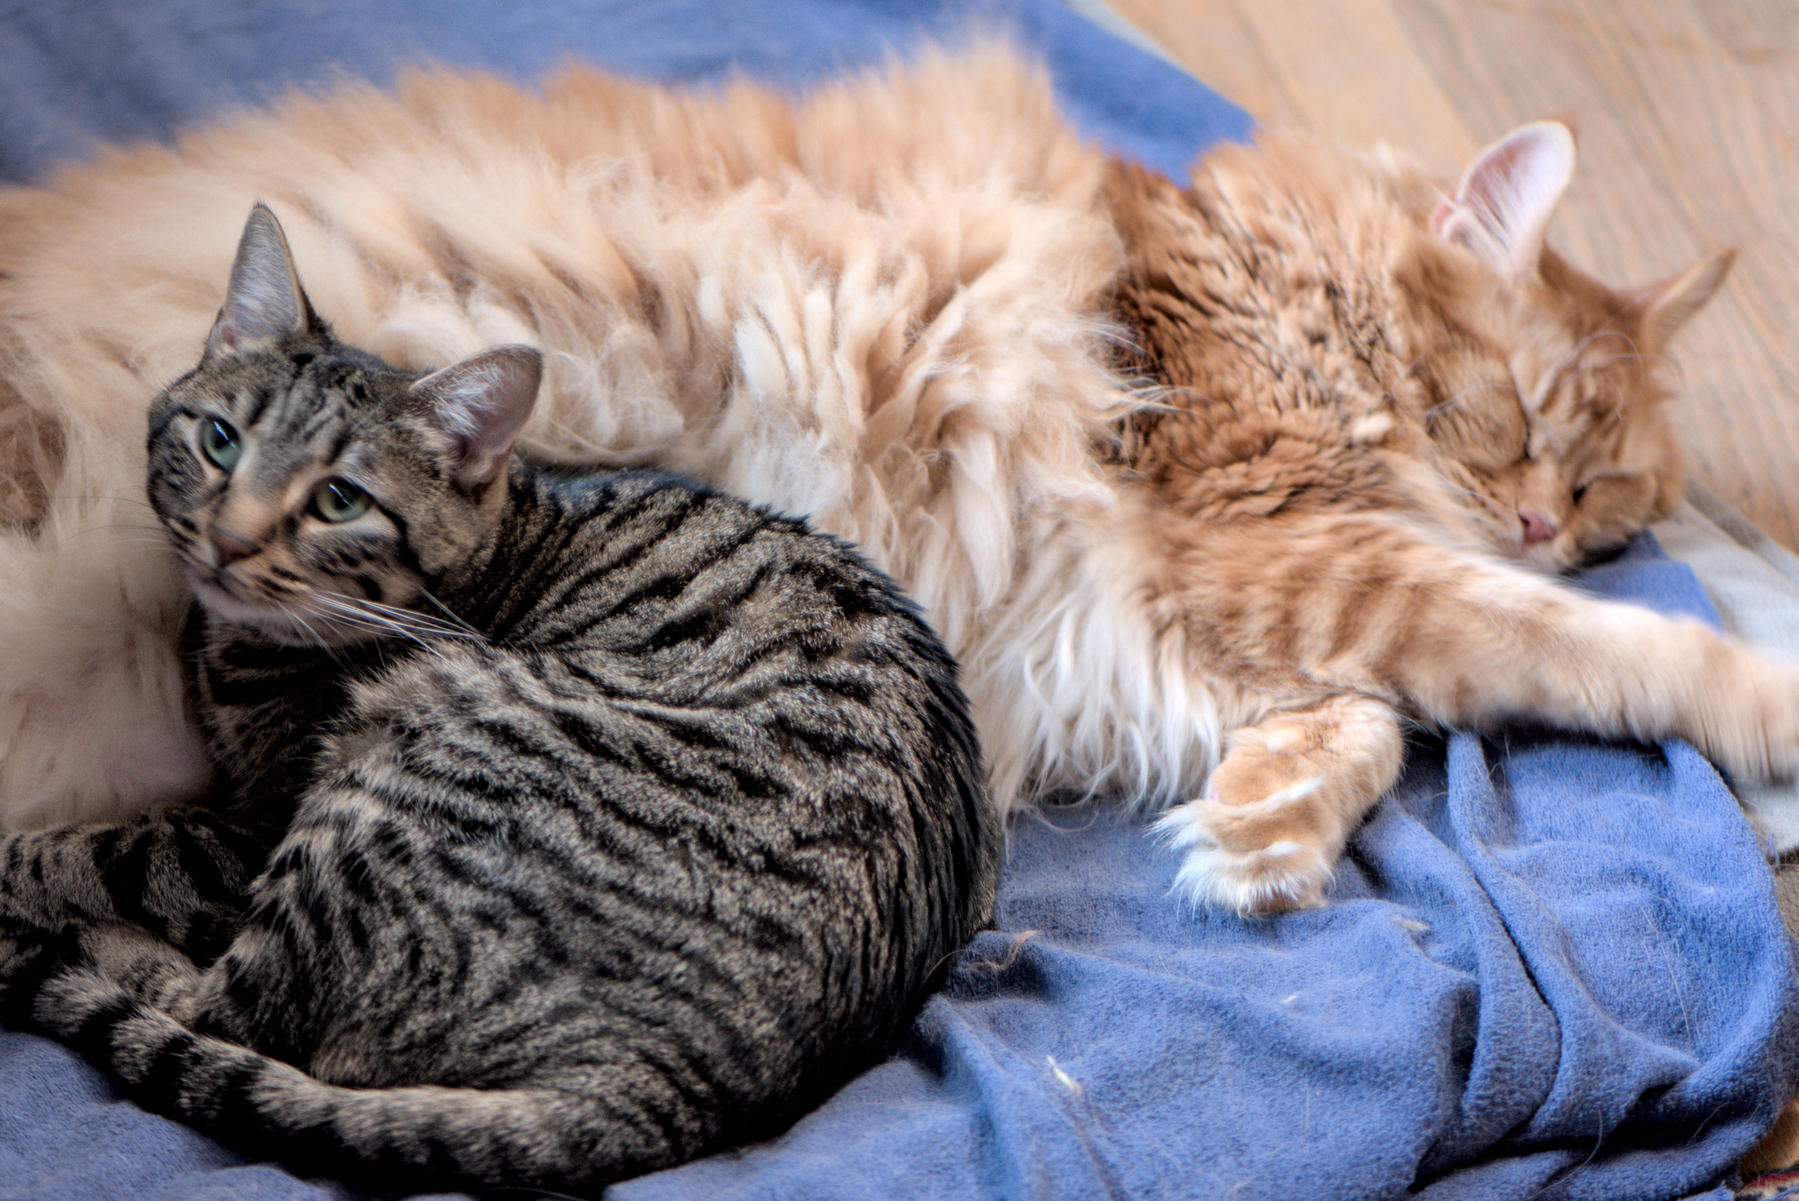 A small, sleek gray-black tabby cat sleeps against the belly of a large, orange Maine Coon cat.